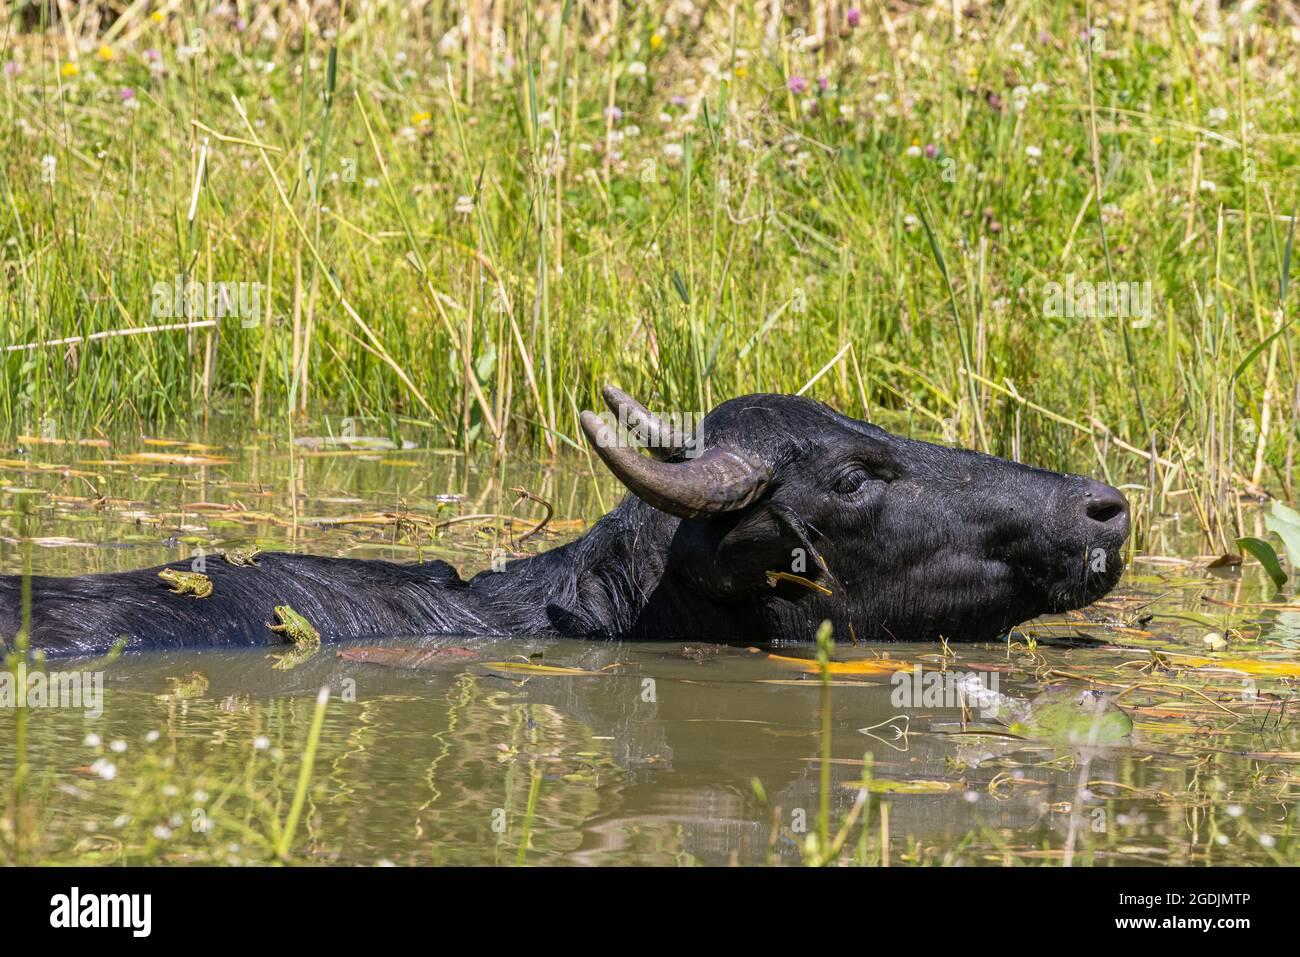 Asian water buffaloes, anoas (Bubalus spec.), swimming in a pond with frogs on its back, Germany Stock Photo